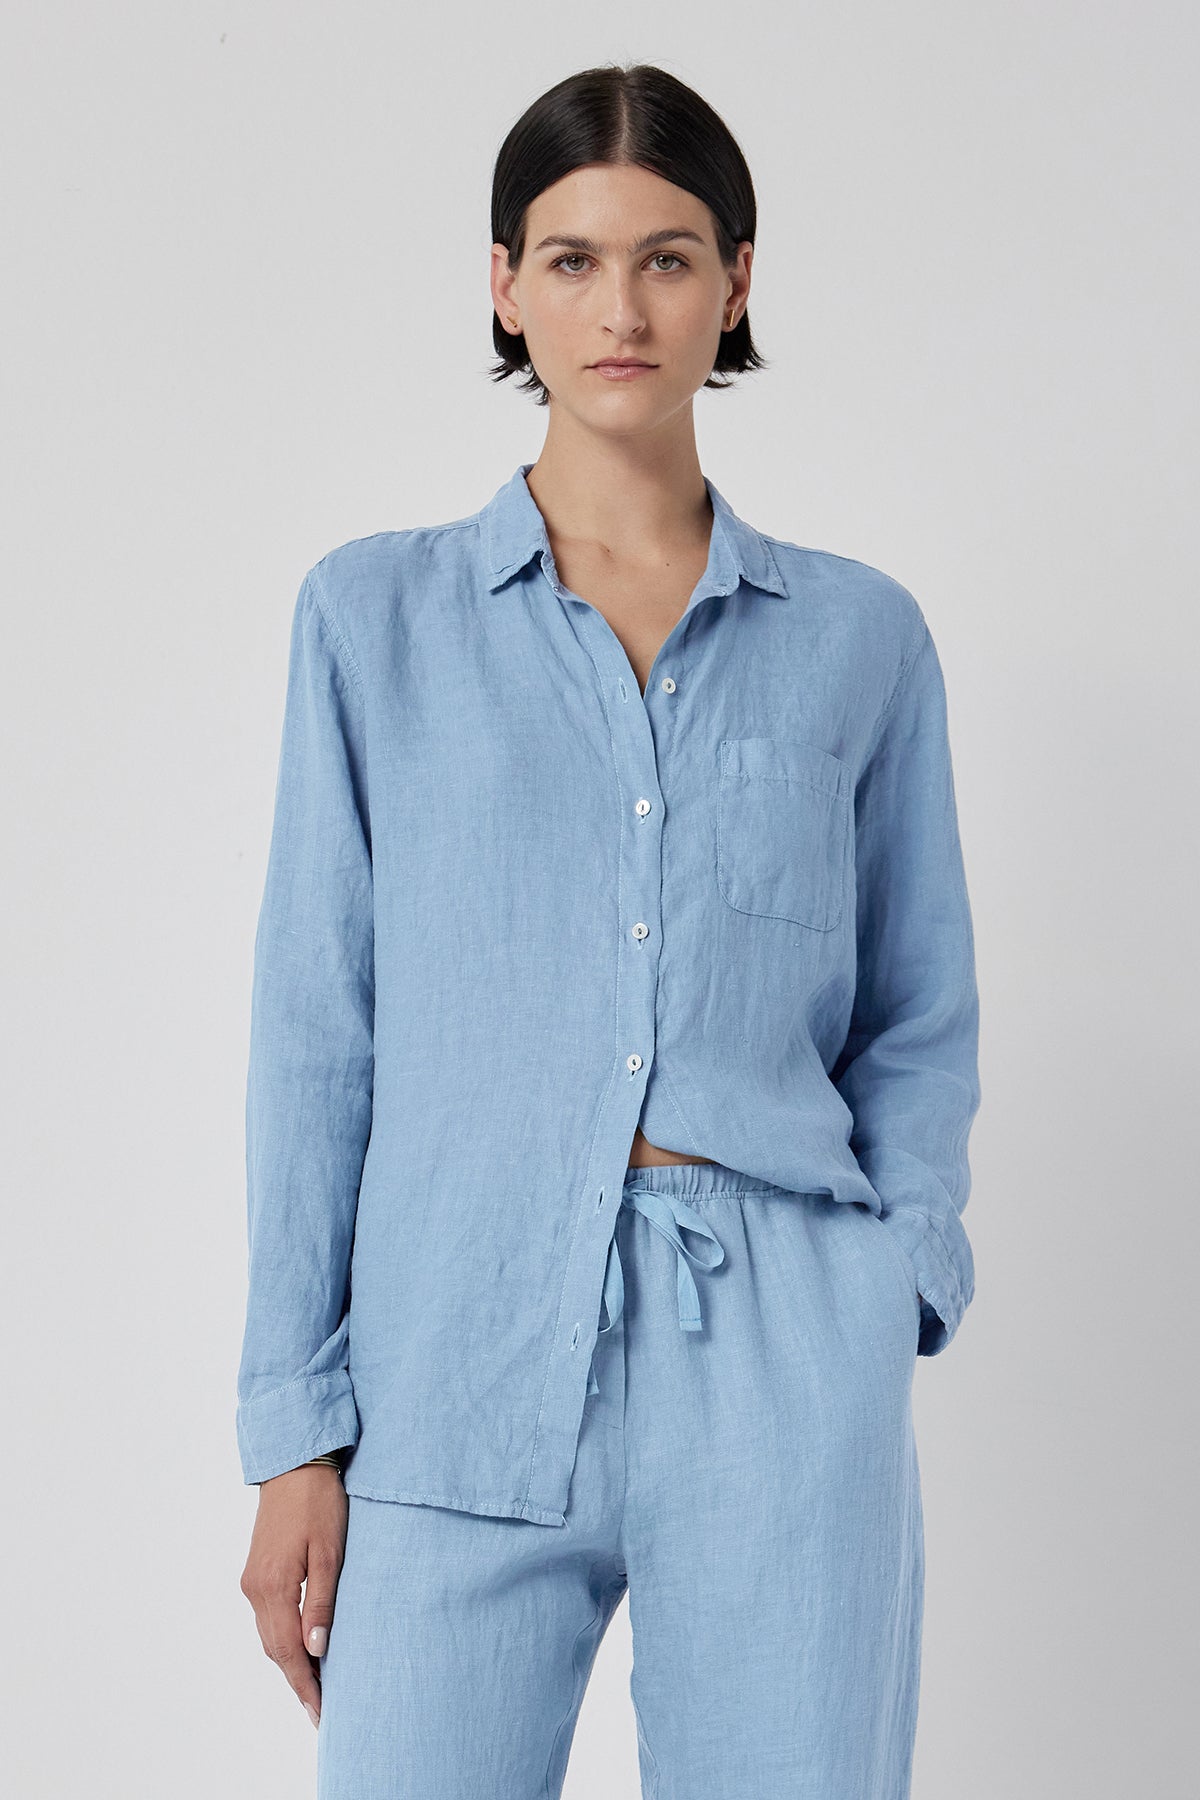 A woman wearing a blue linen Mulholland Shirt by Velvet by Jenny Graham with a relaxed silhouette and scooped hemline.-36212593721537